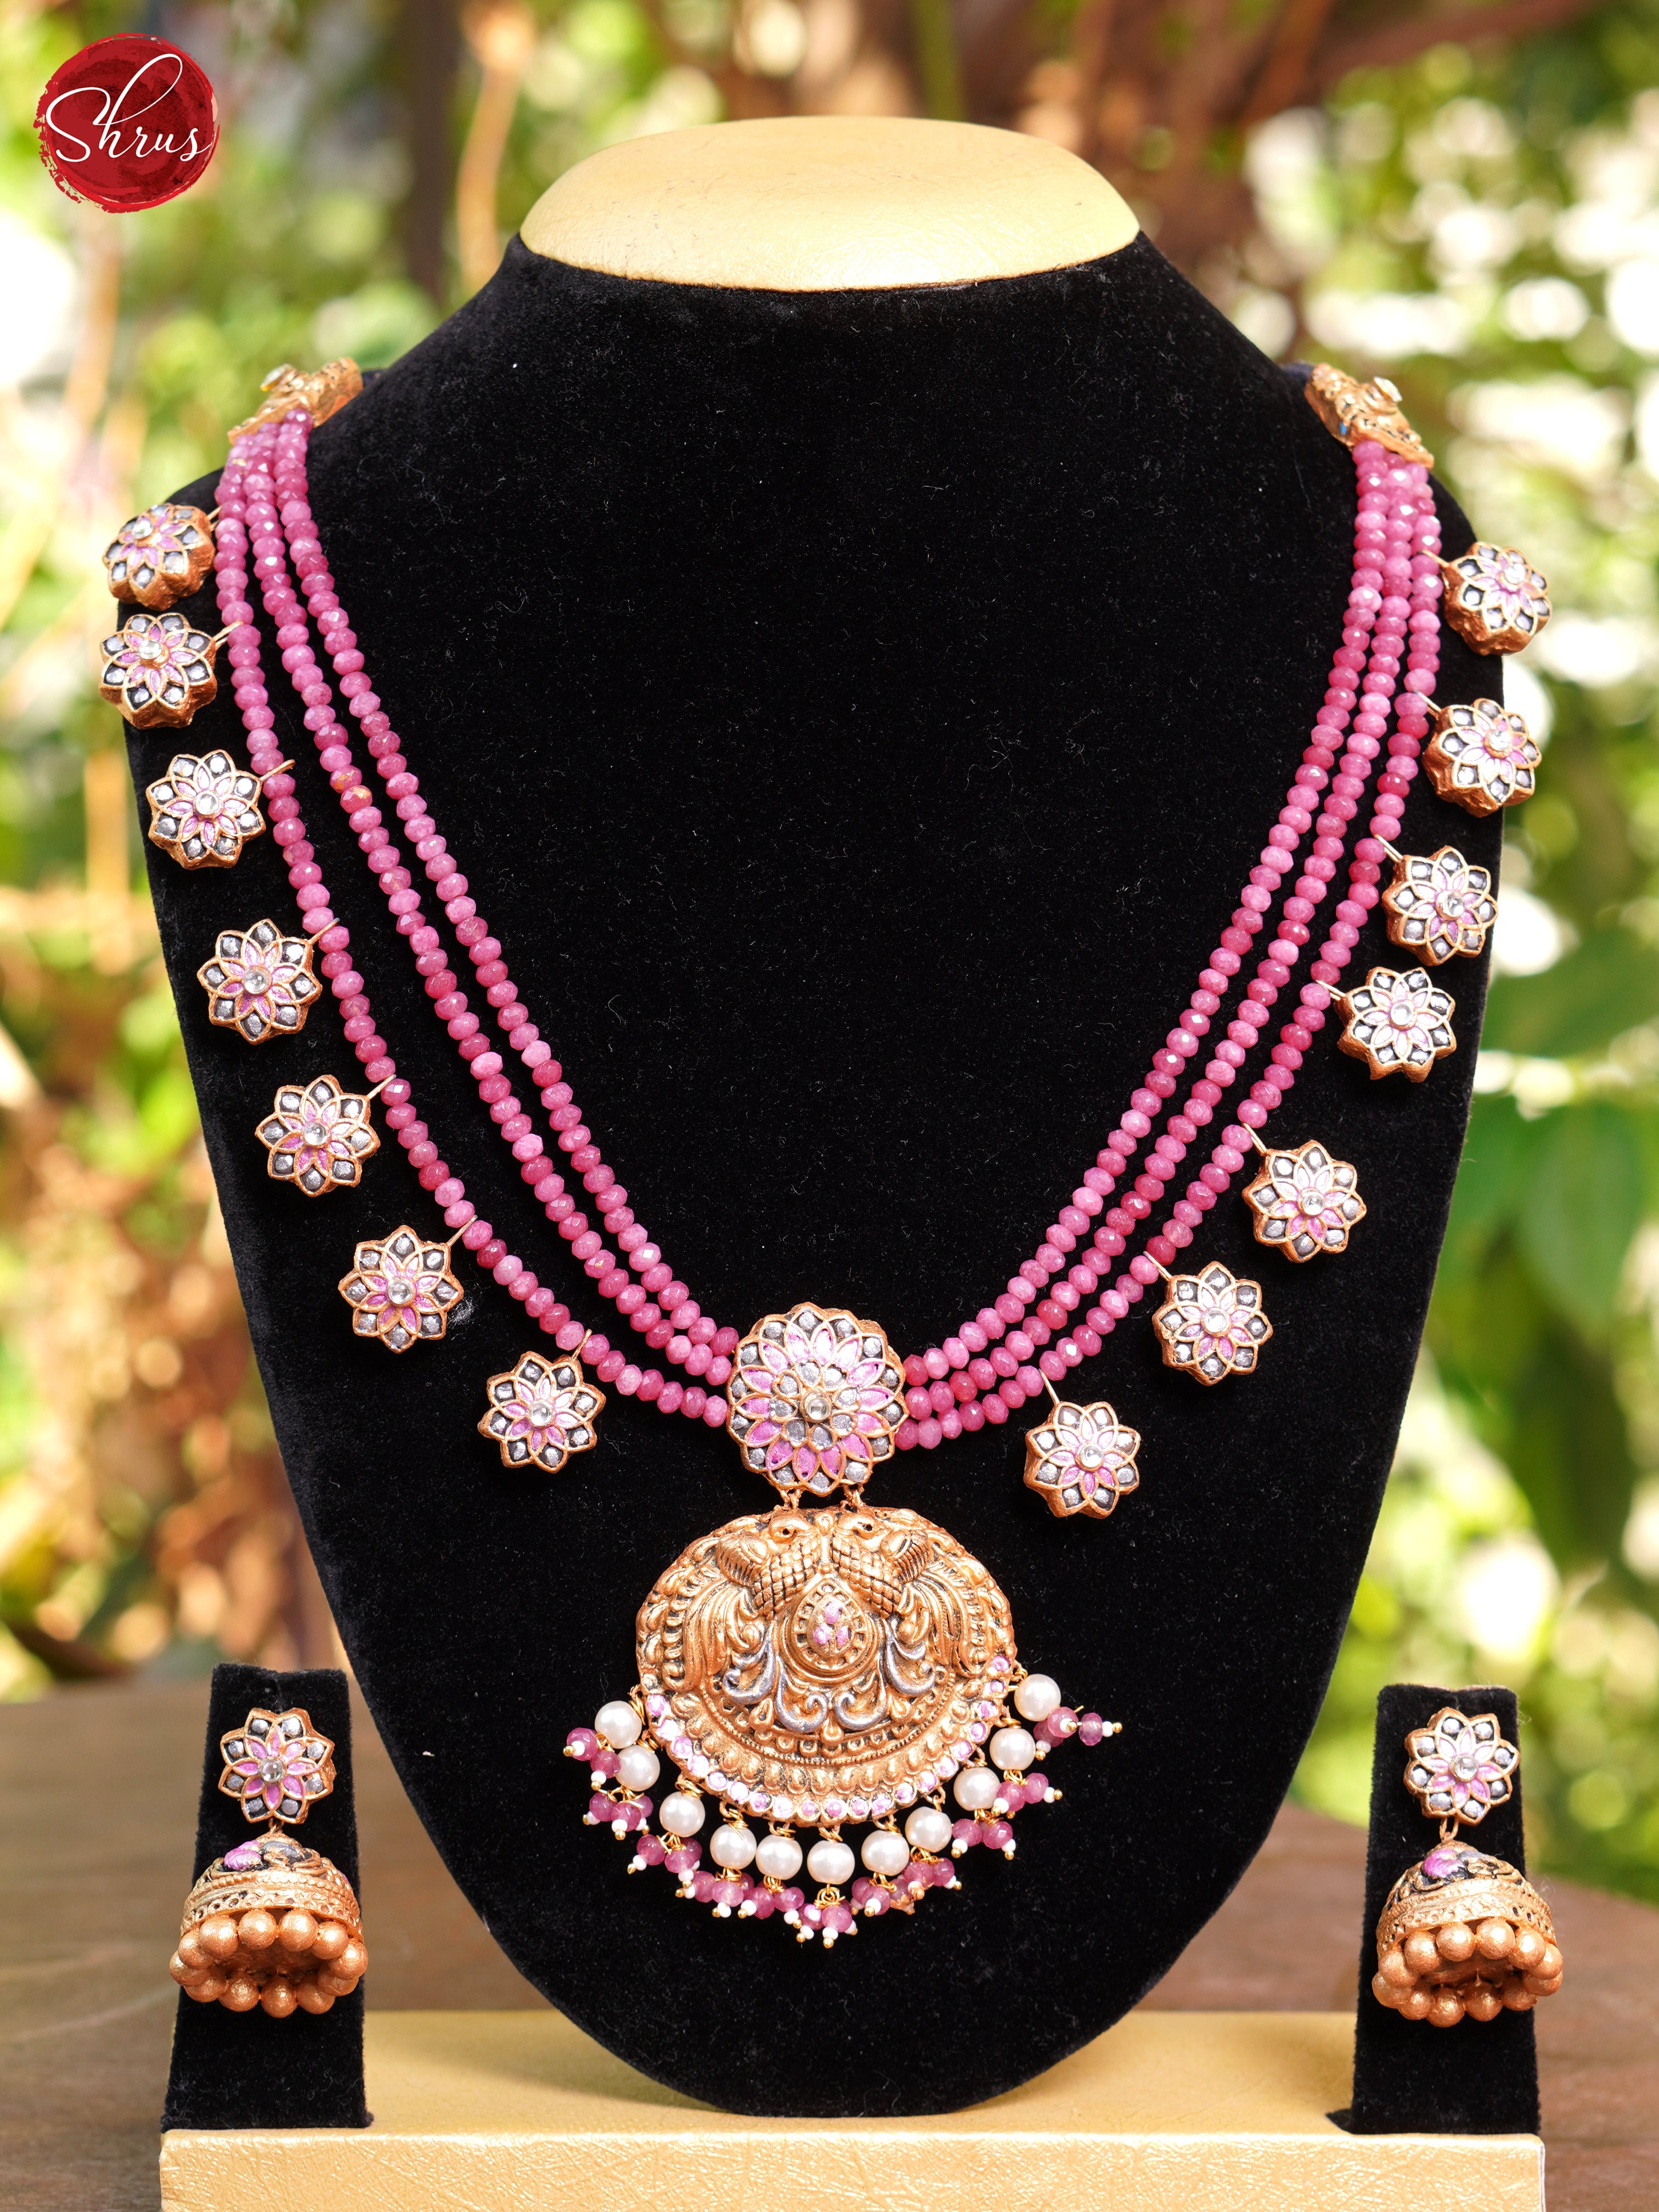 Handcrafted Teracotta Jewellery with Jhumkas - Accessories - Shop on ShrusEternity.com